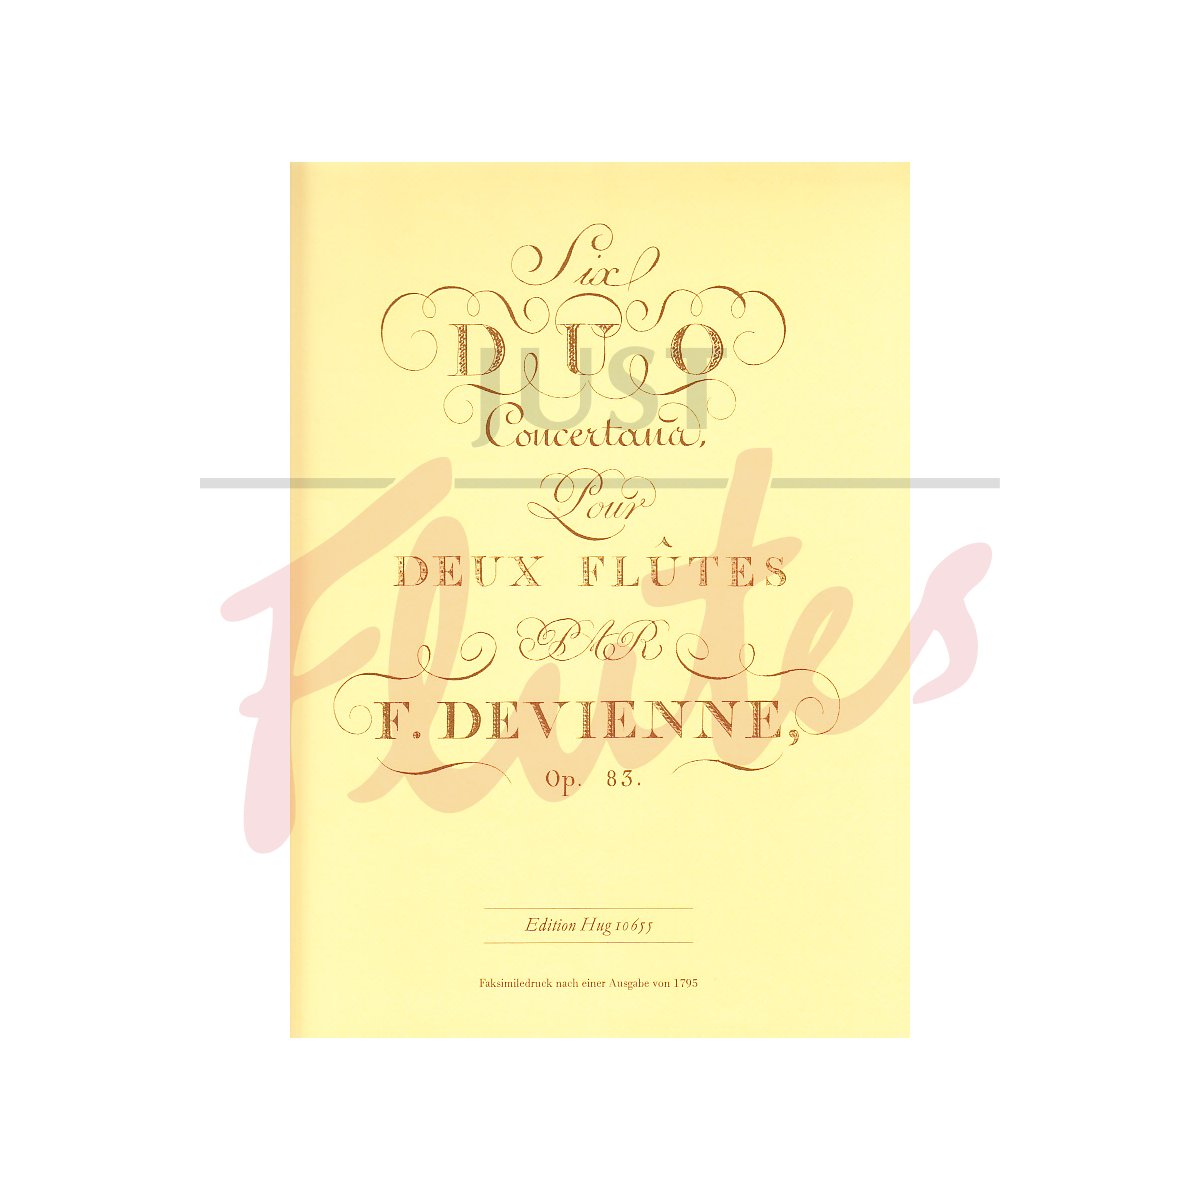 6 Duos Concertantes for Two Flutes